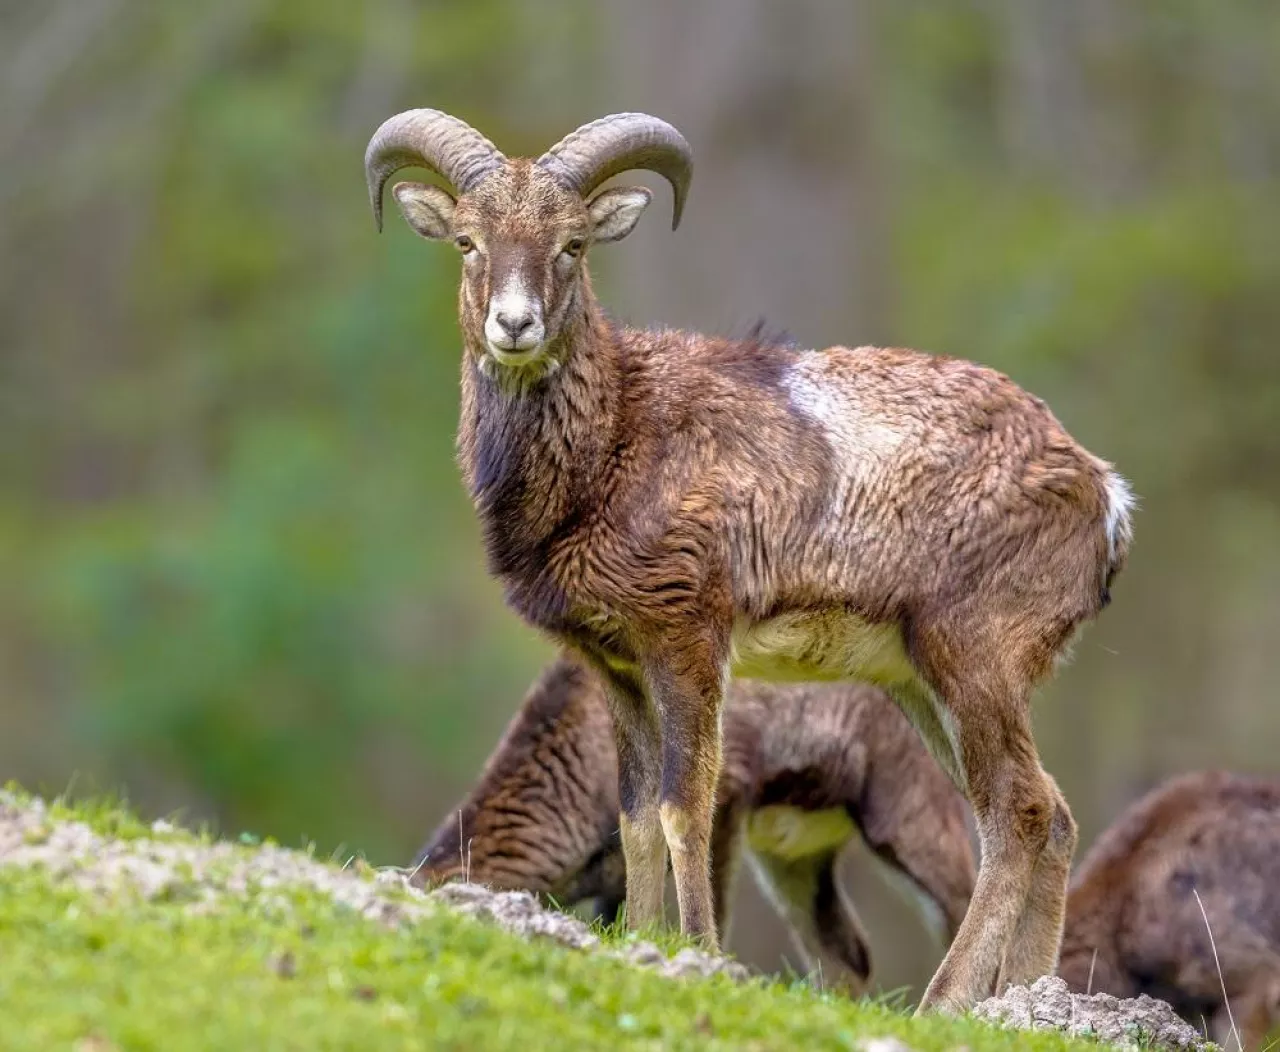 Frontal view of male Mouflon (Ovis gmelinii) sheep standing on a hill in the forest and looking at camera with eye contact